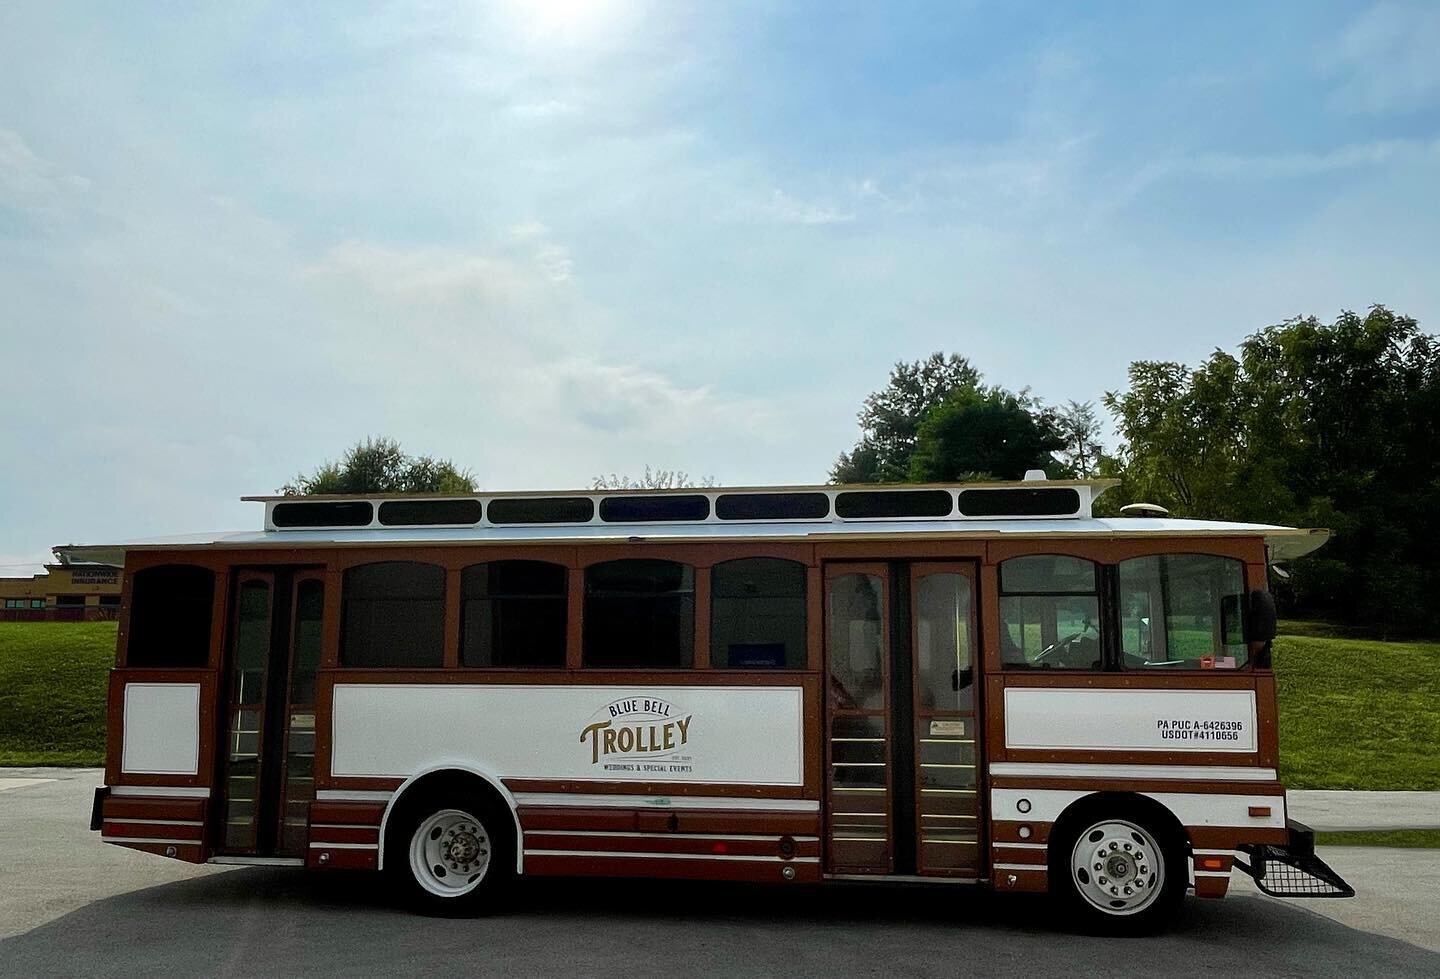 Pearl underwent another makeover to celebrate the official launch of Blue Bell Trolley thanks to our friends at @signarama_norristown! 

All new white paneling with our logos on each side and social media on the back! Pearl is fresh to death for when